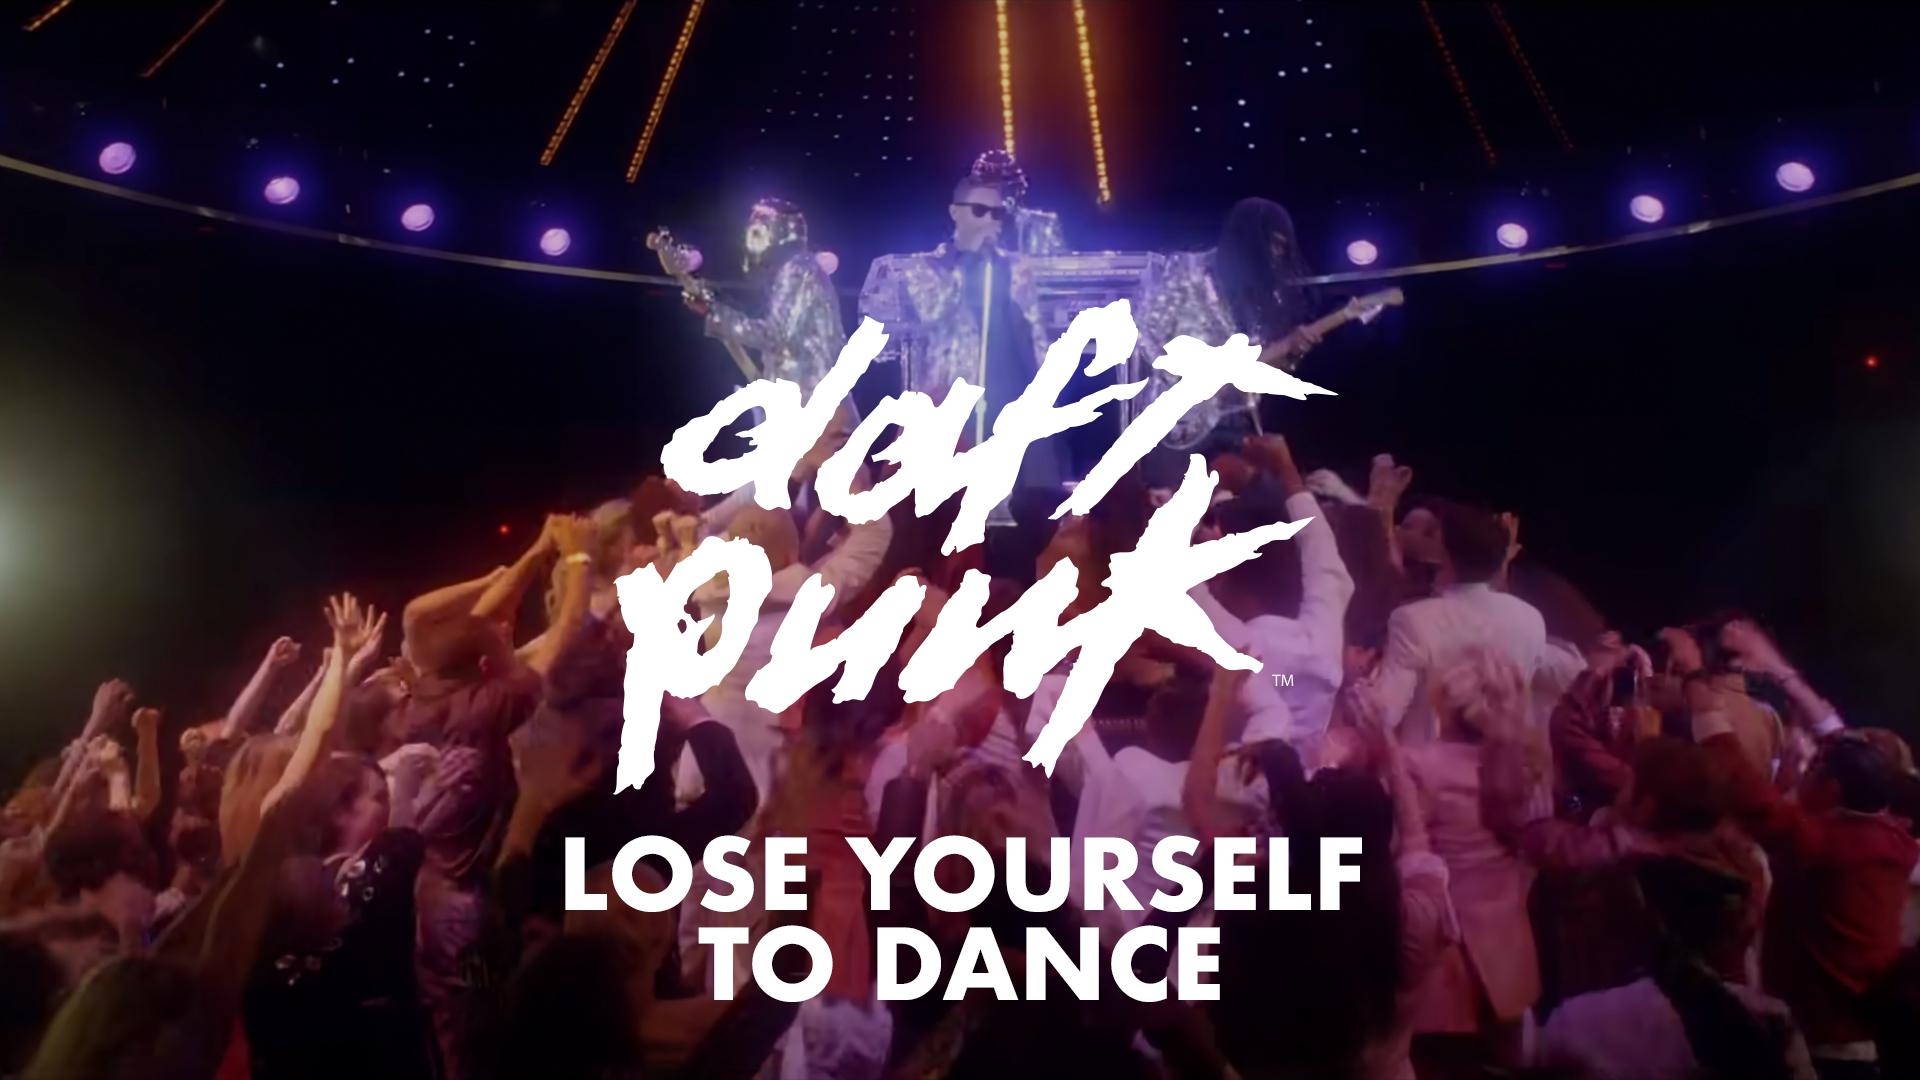 Daft Punk - Lose Yourself to Dance (Official Version)